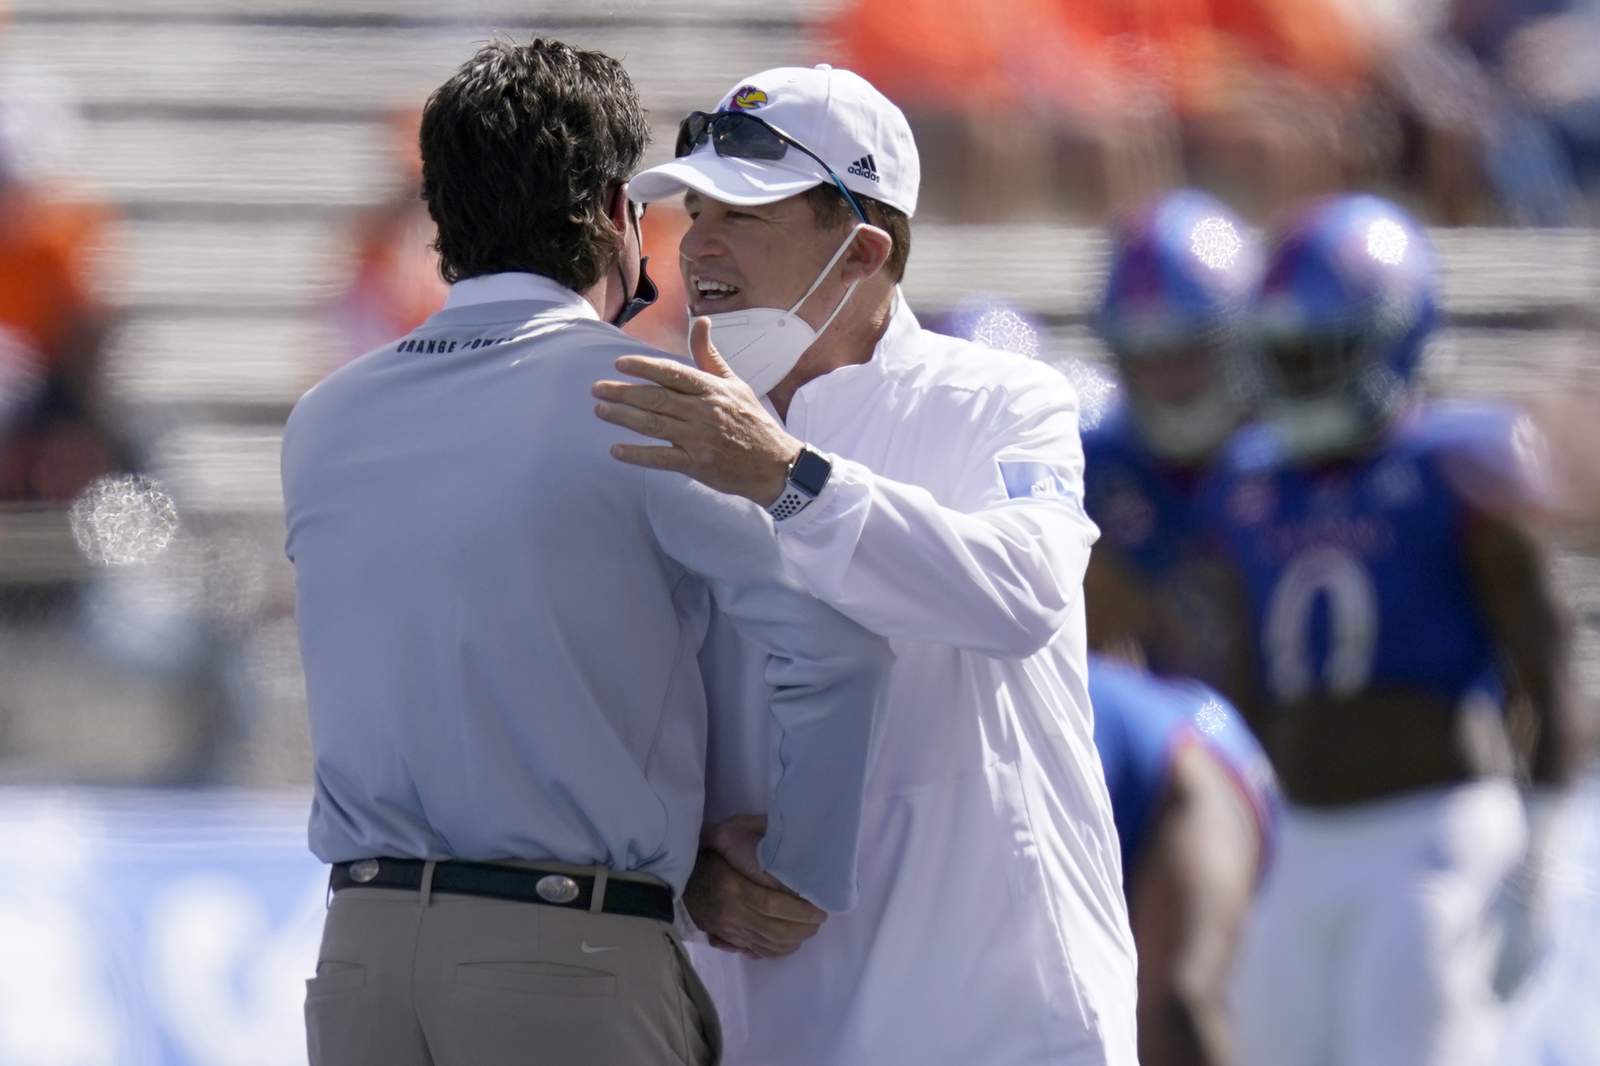 Kansas coach cleared of virus but skips West Virginia game